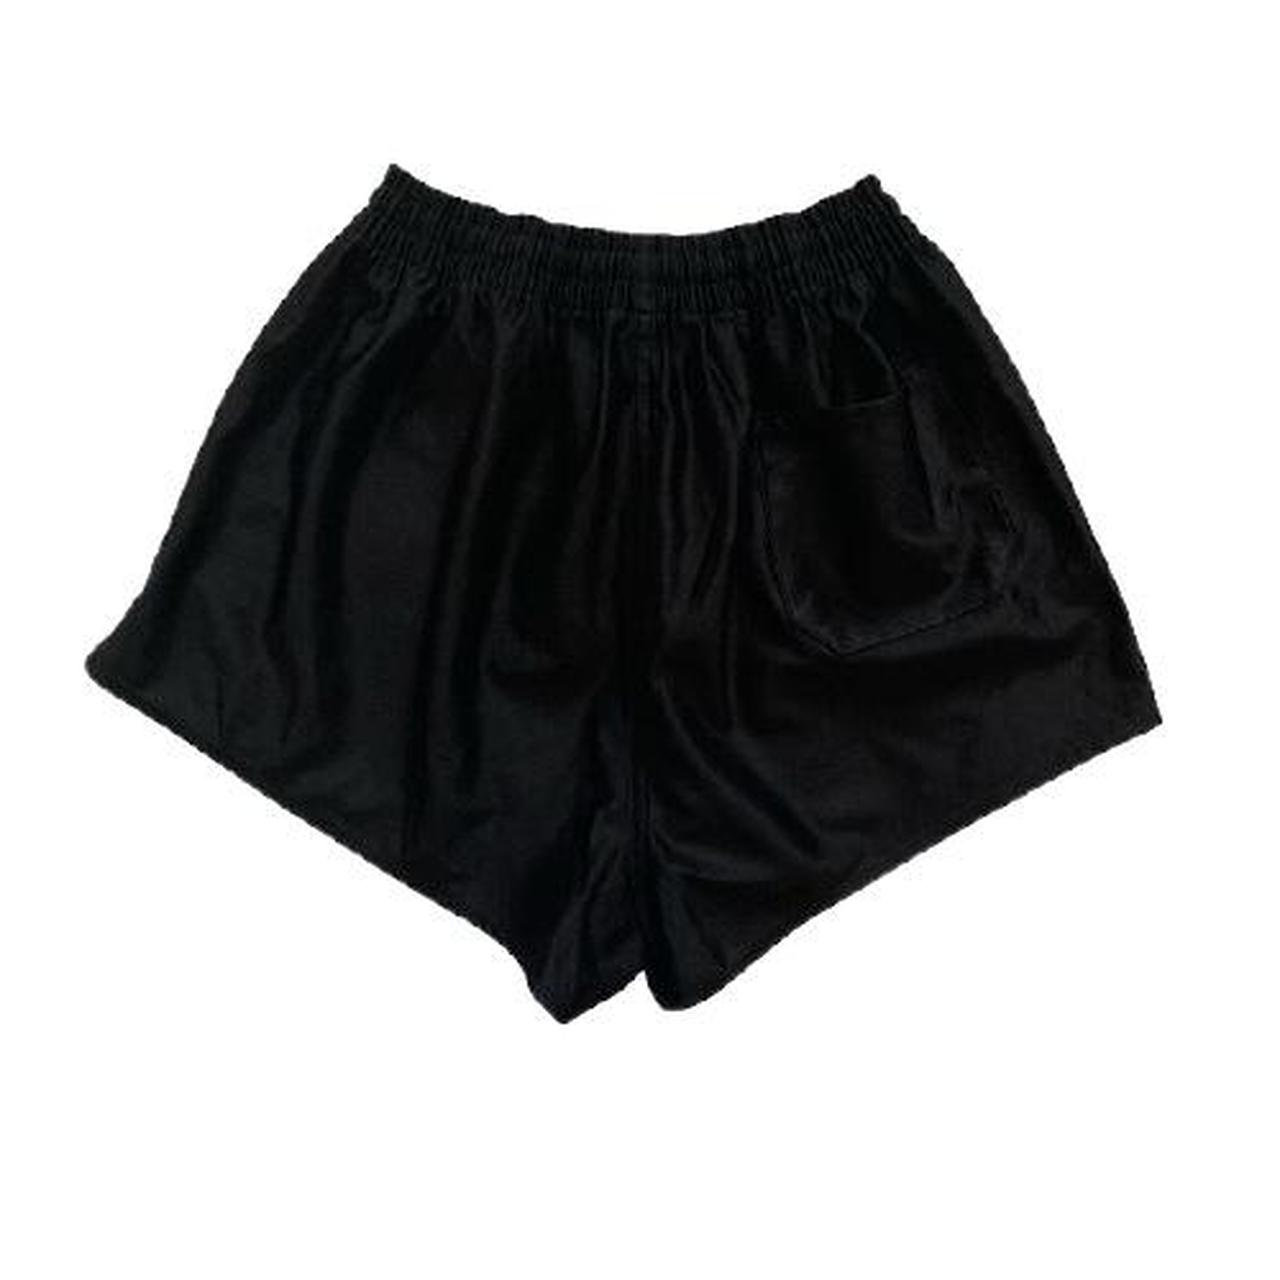 Product Image 2 - Vintage shorts in black by